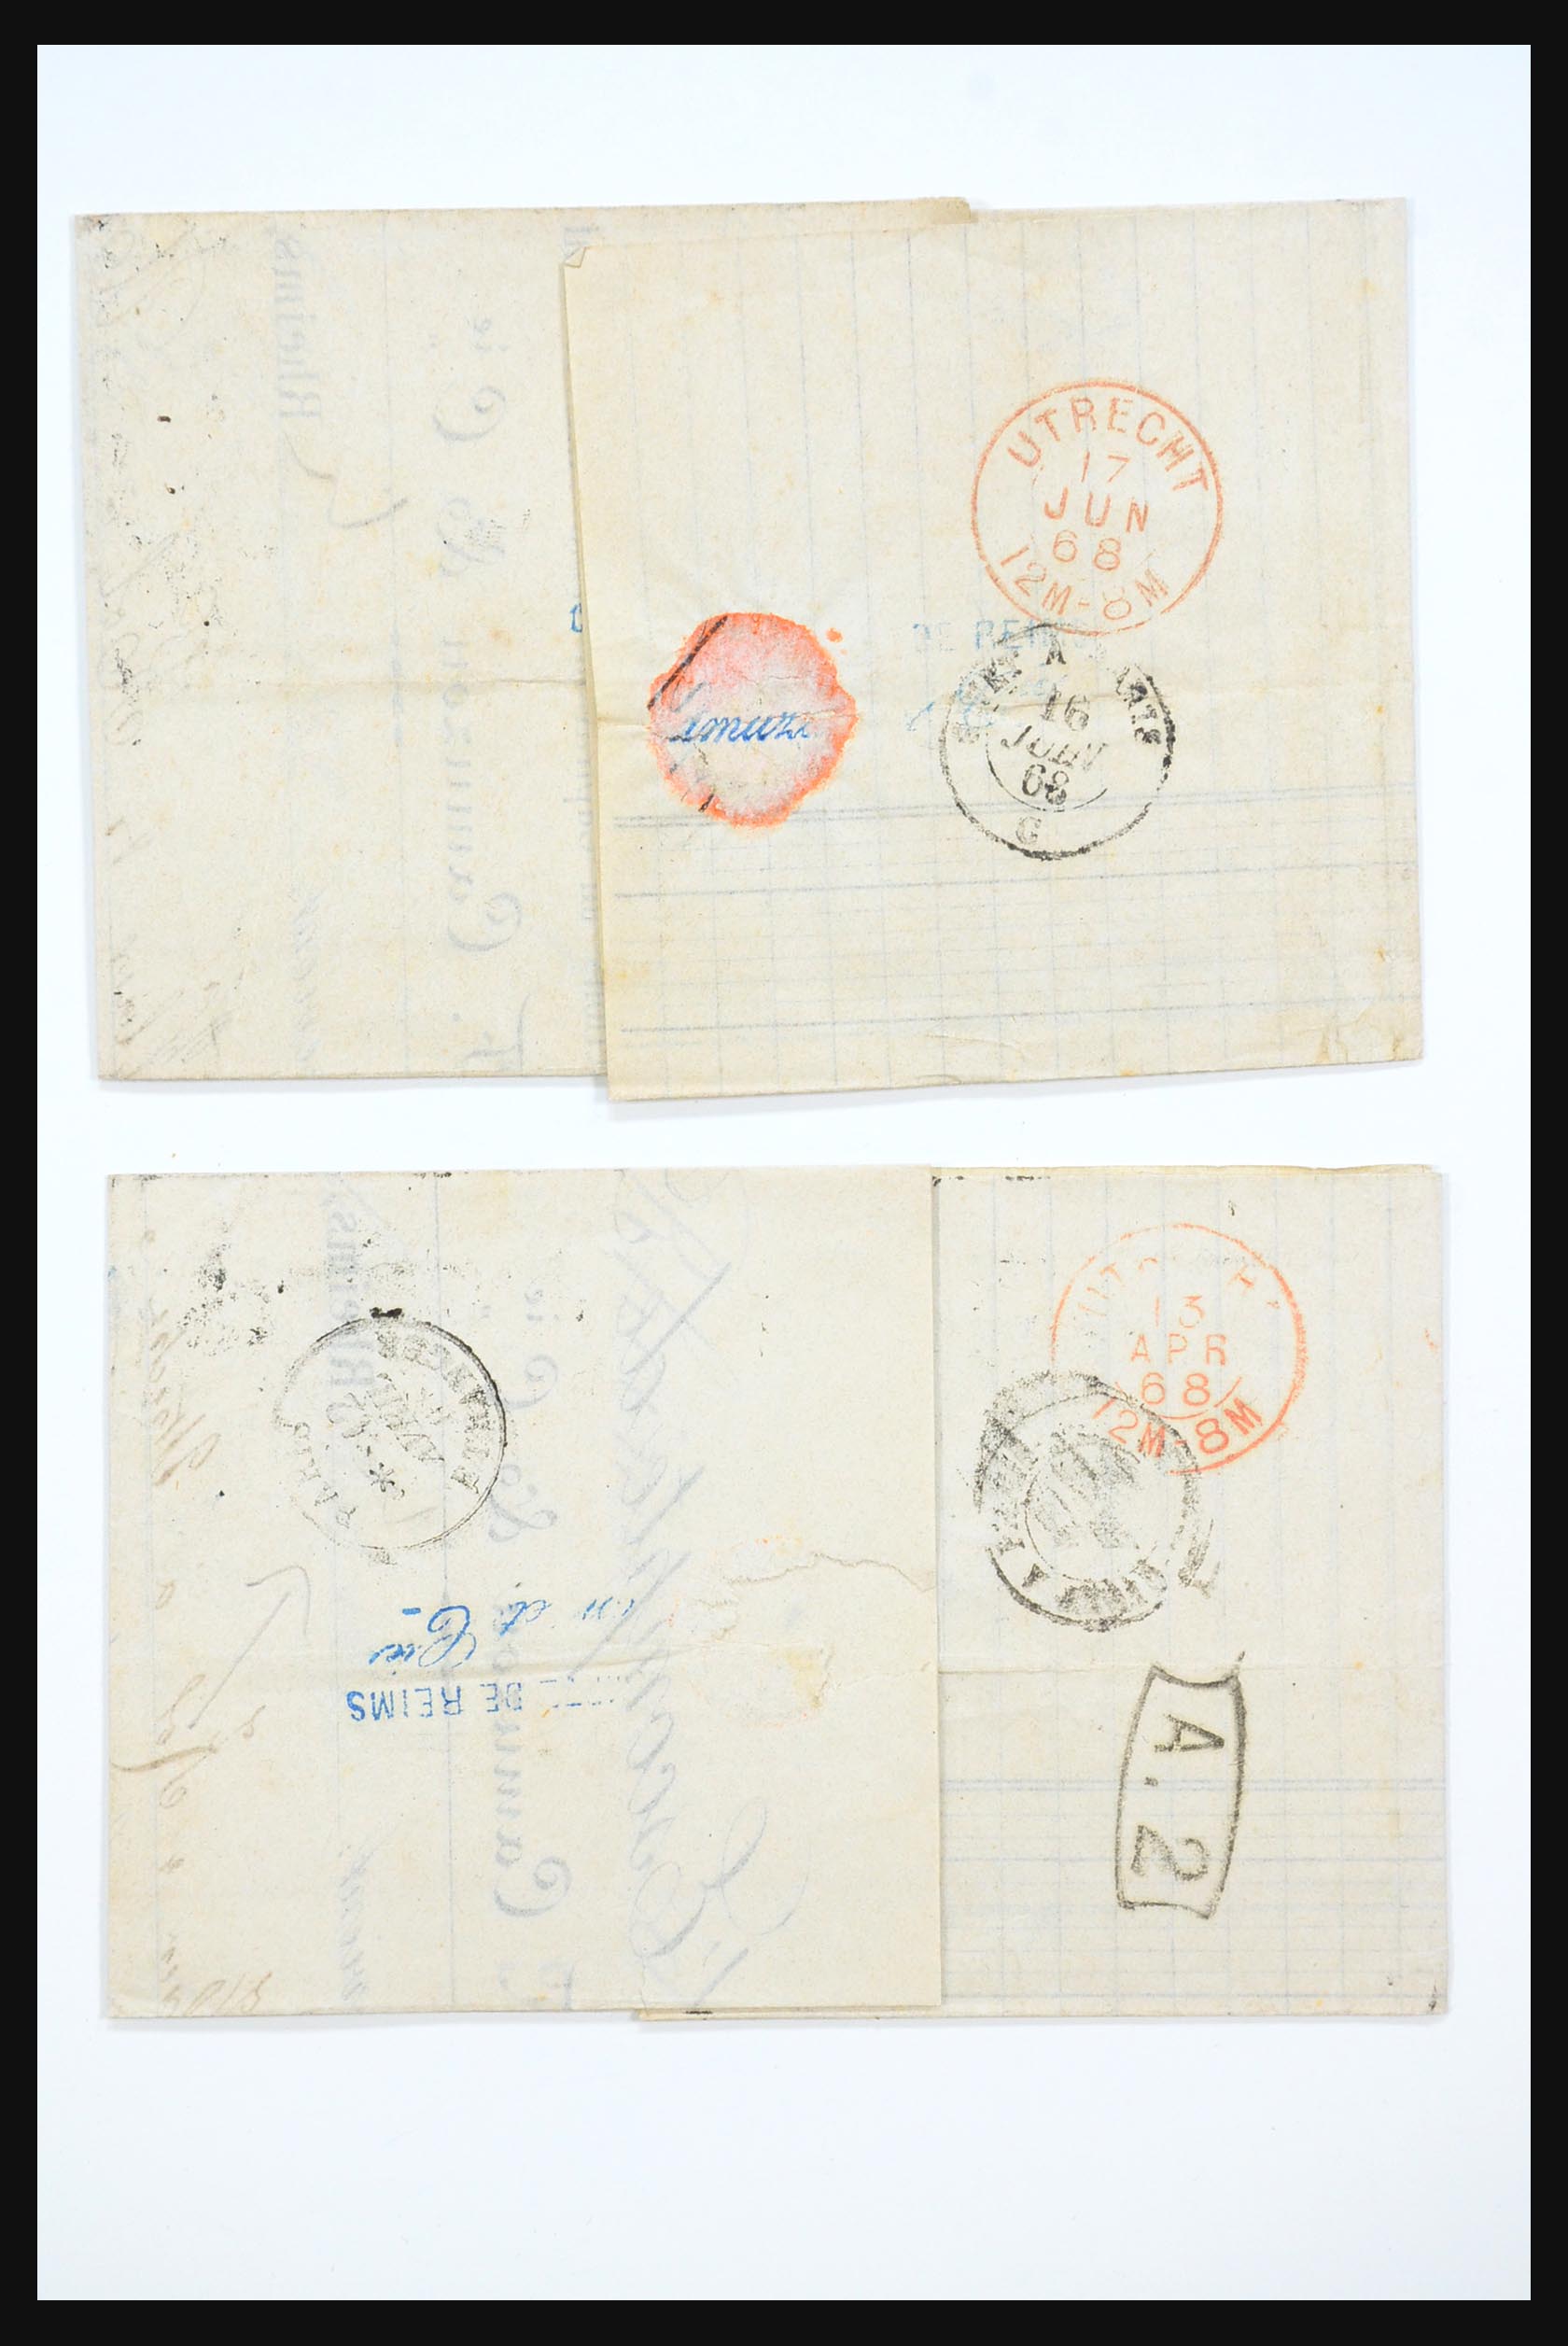 31359 0002 - 31359 France and Colonies covers 1770-1960.